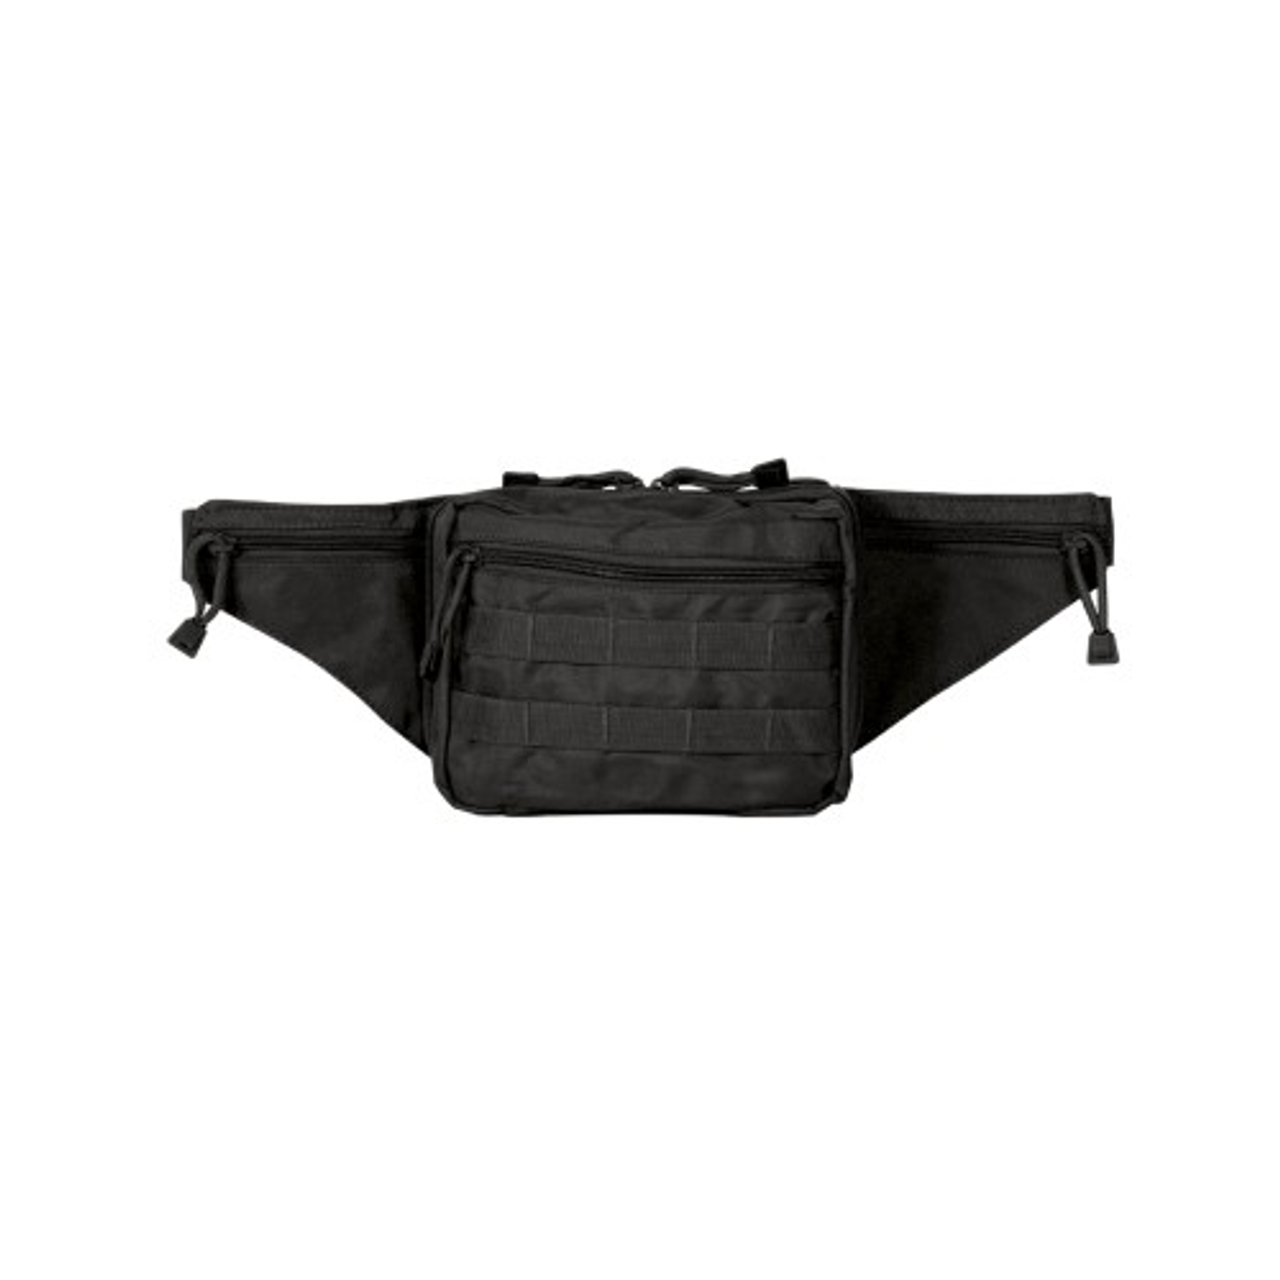 VOODOO TACTICAL Hide-A-Weapon Fanny pack - GMS TACTICAL